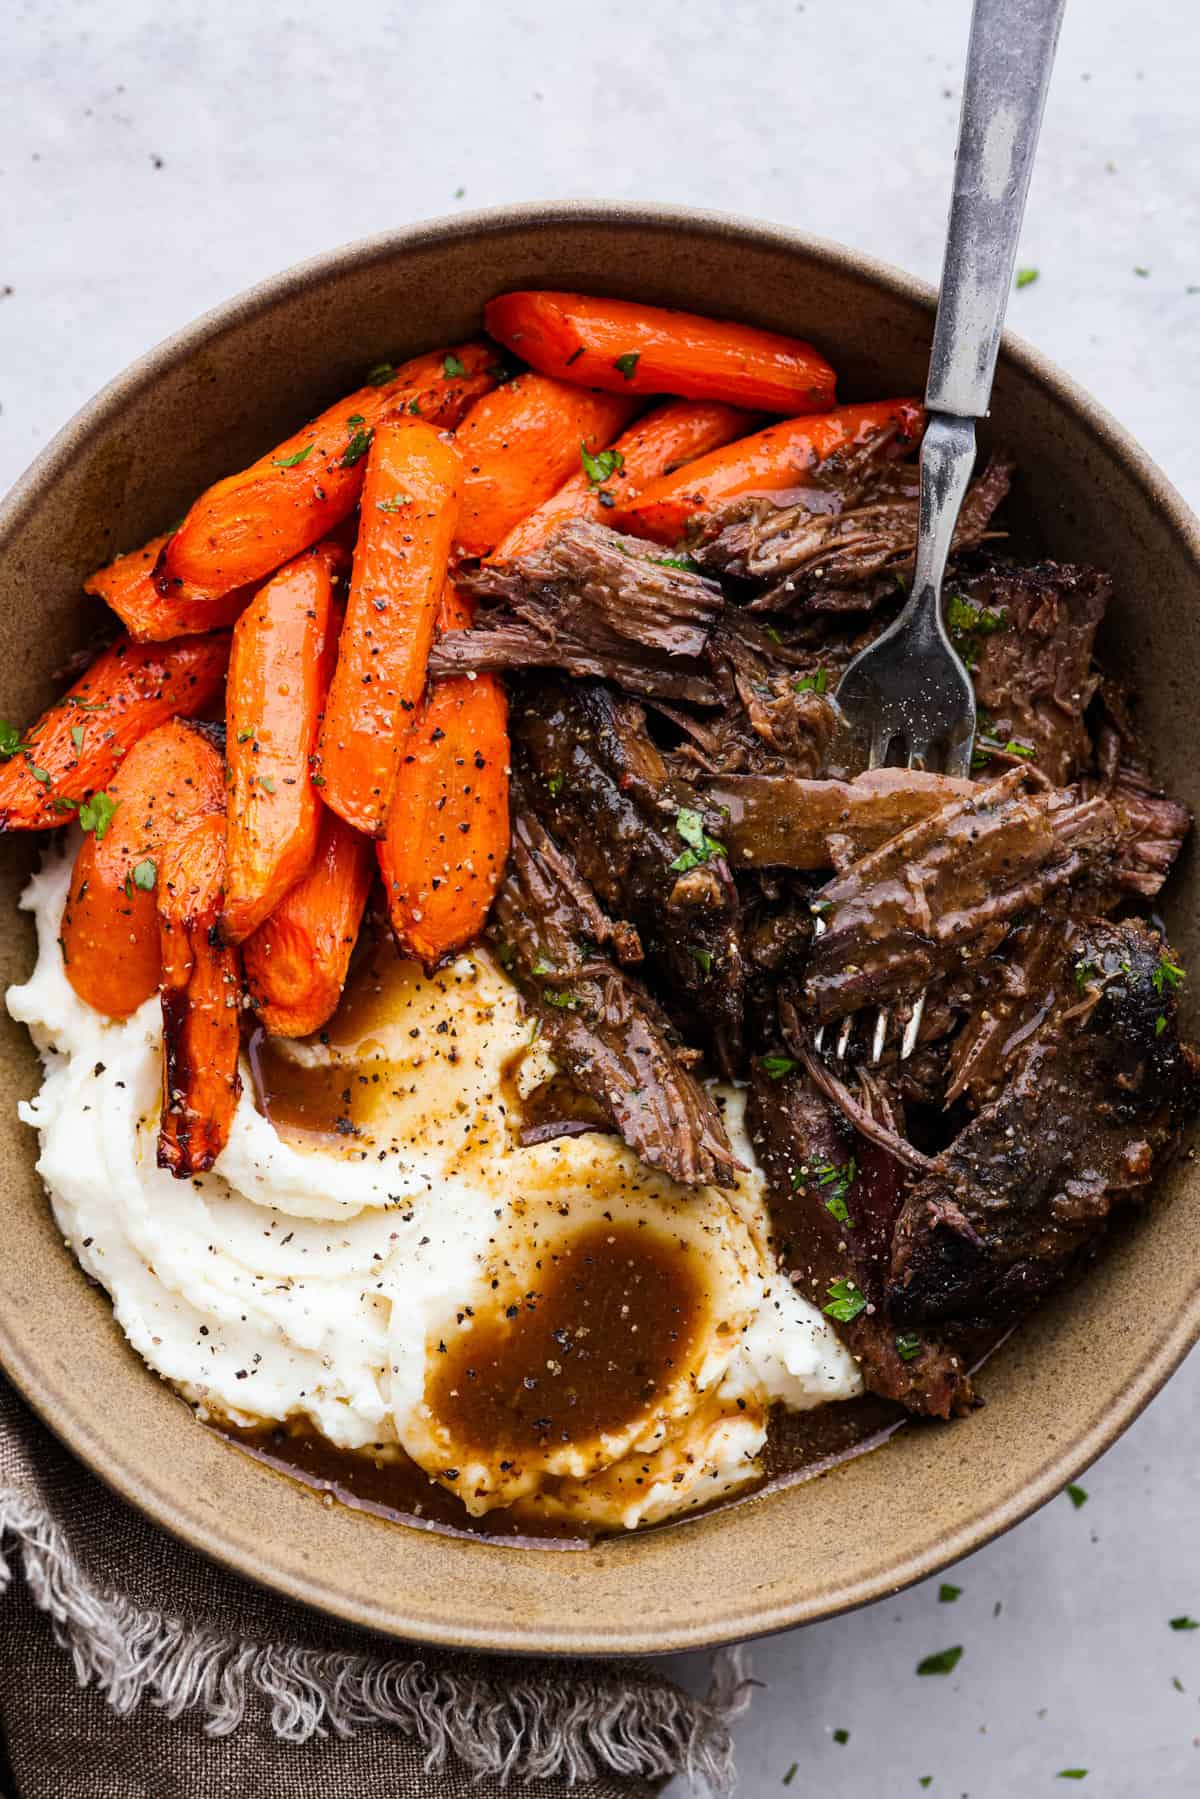 Shredded pot roast served with carrots and mashed potatoes.